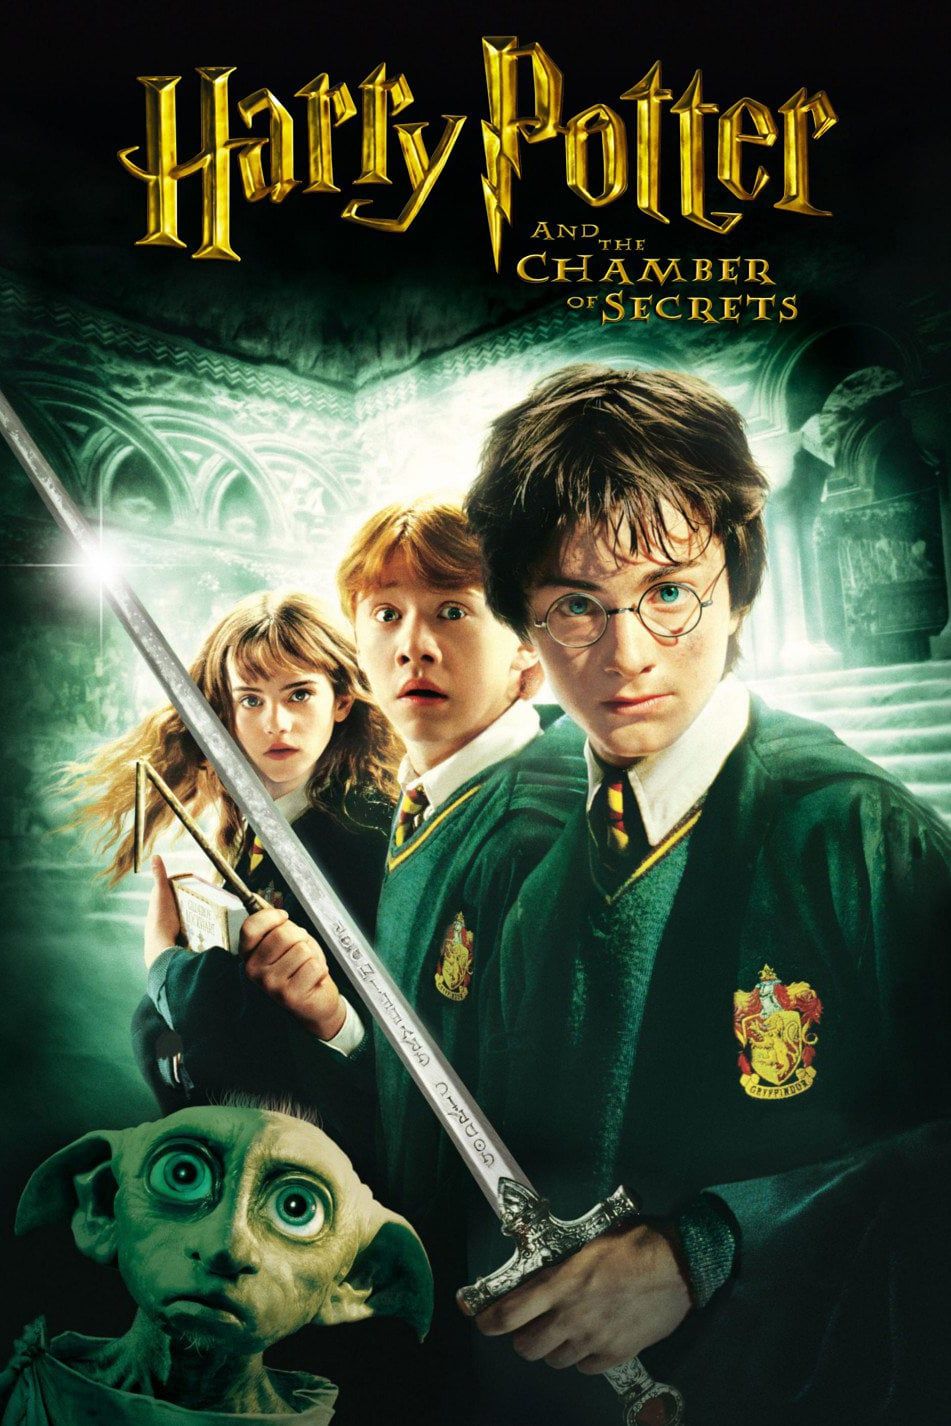 harry potter full movie in hindi download 720p